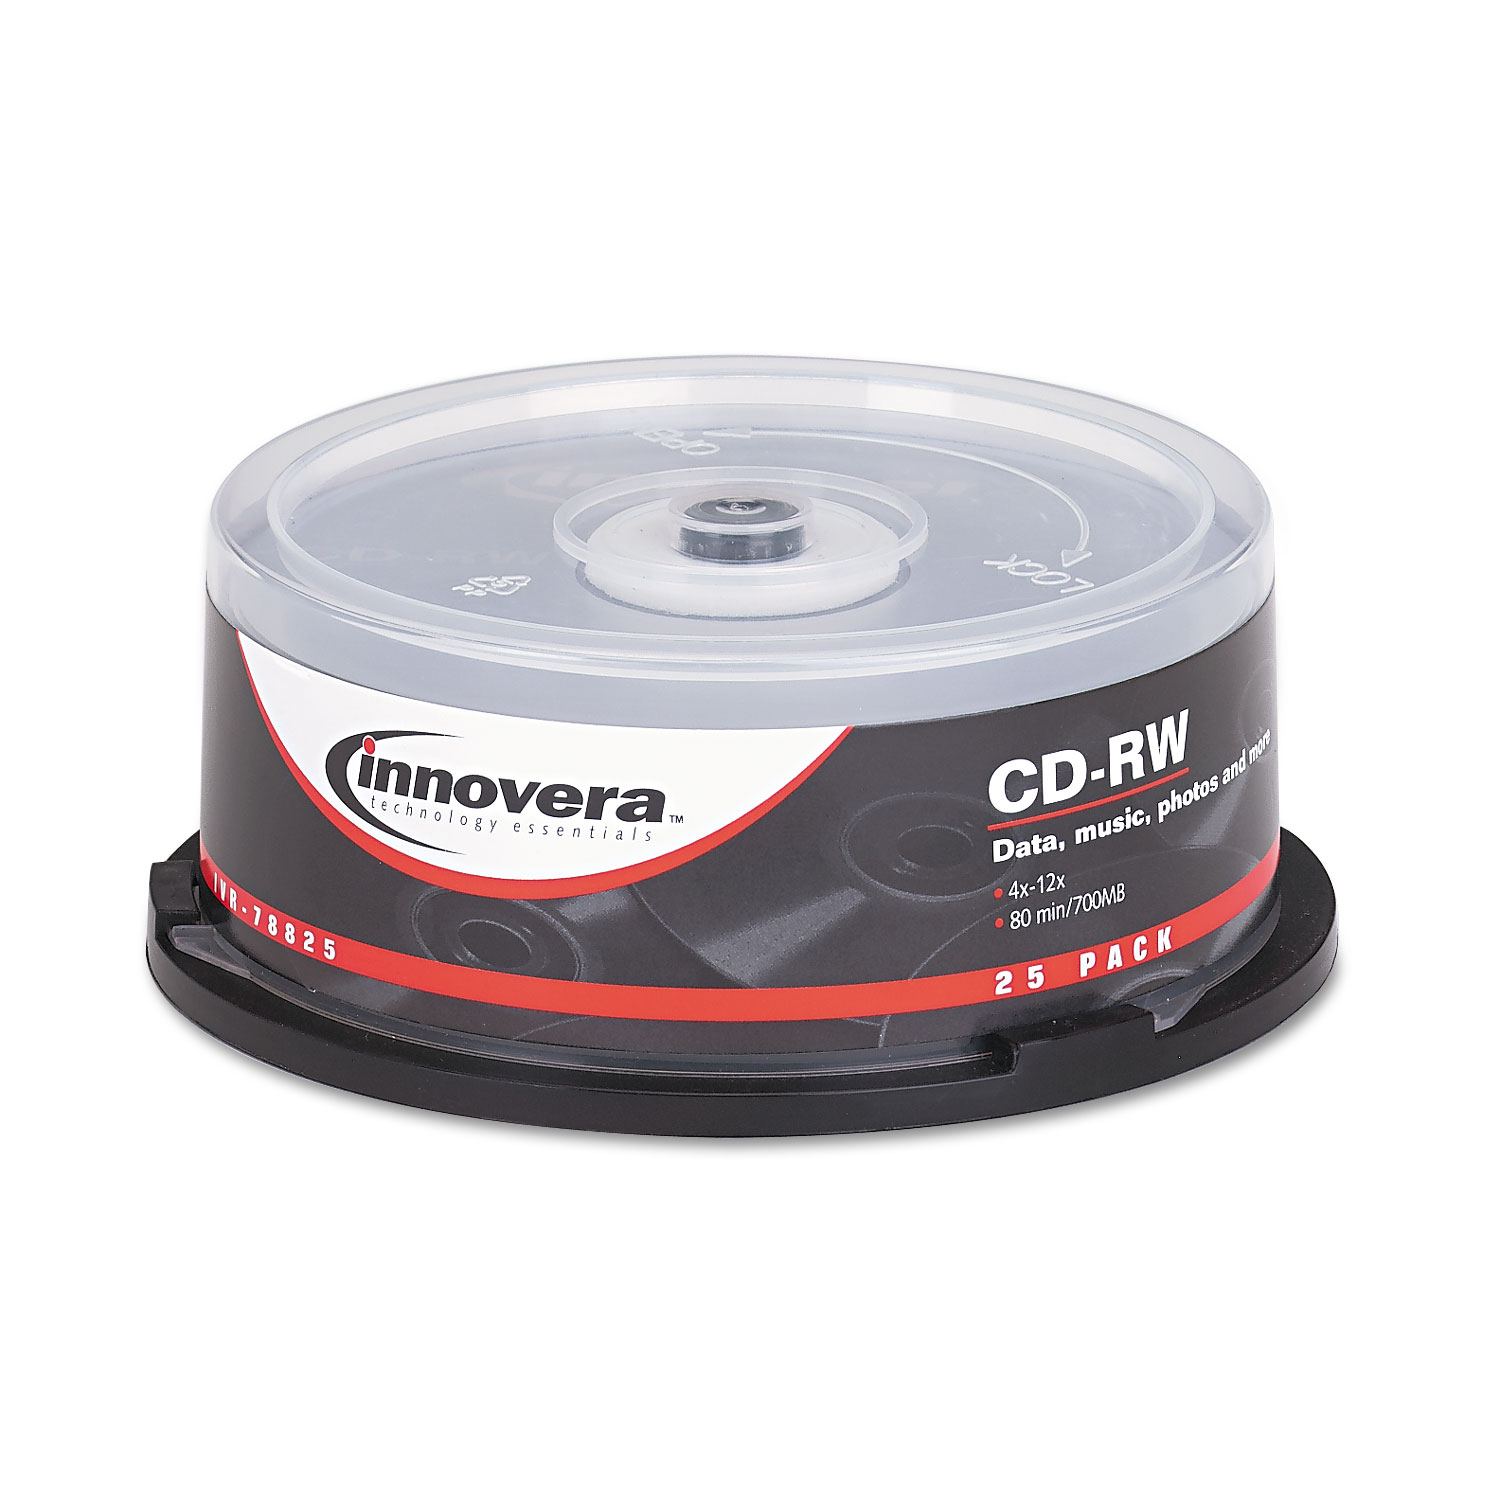  Innovera IVR78825 CD-RW Discs, 700MB/80min, 12x, Spindle, Silver, 25/Pack (IVR78825) 